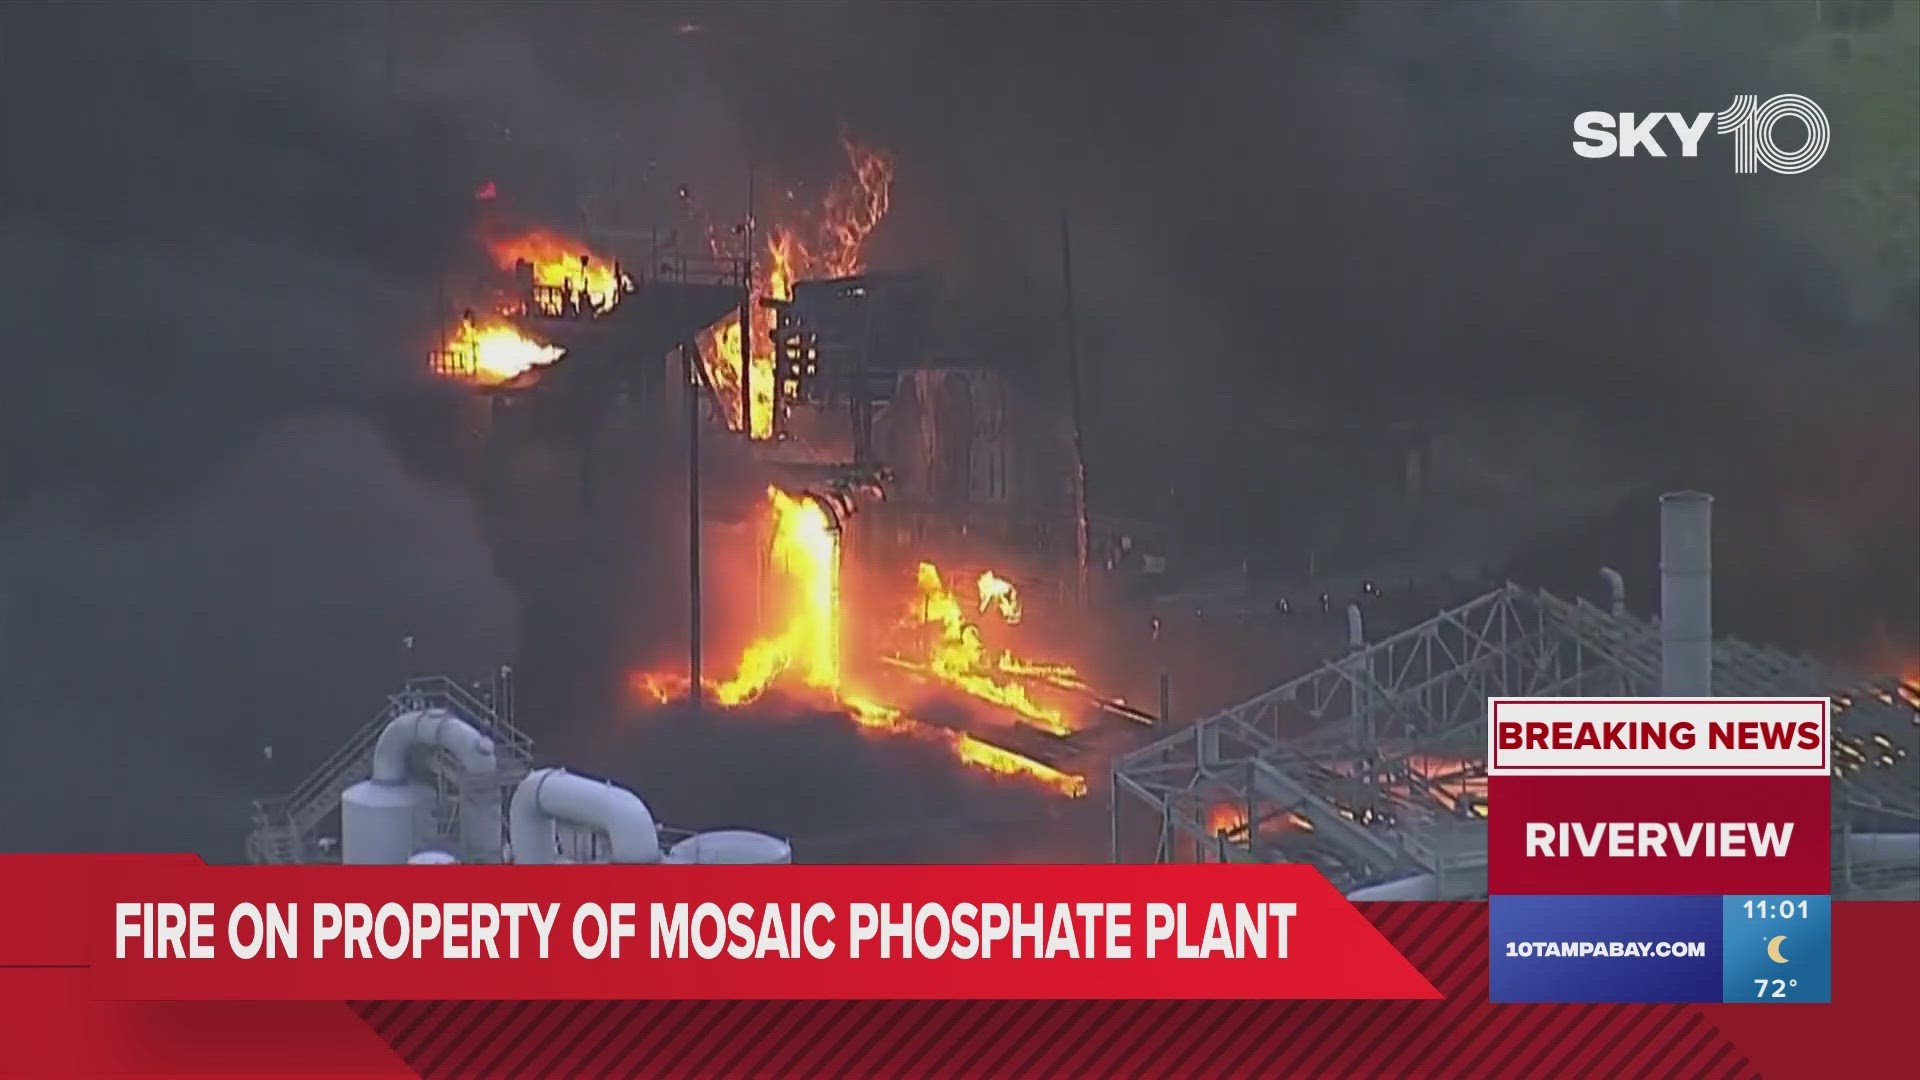 Aerials from Sky 10 showed a large cloud of black smoke billowing from the Mosaic property.